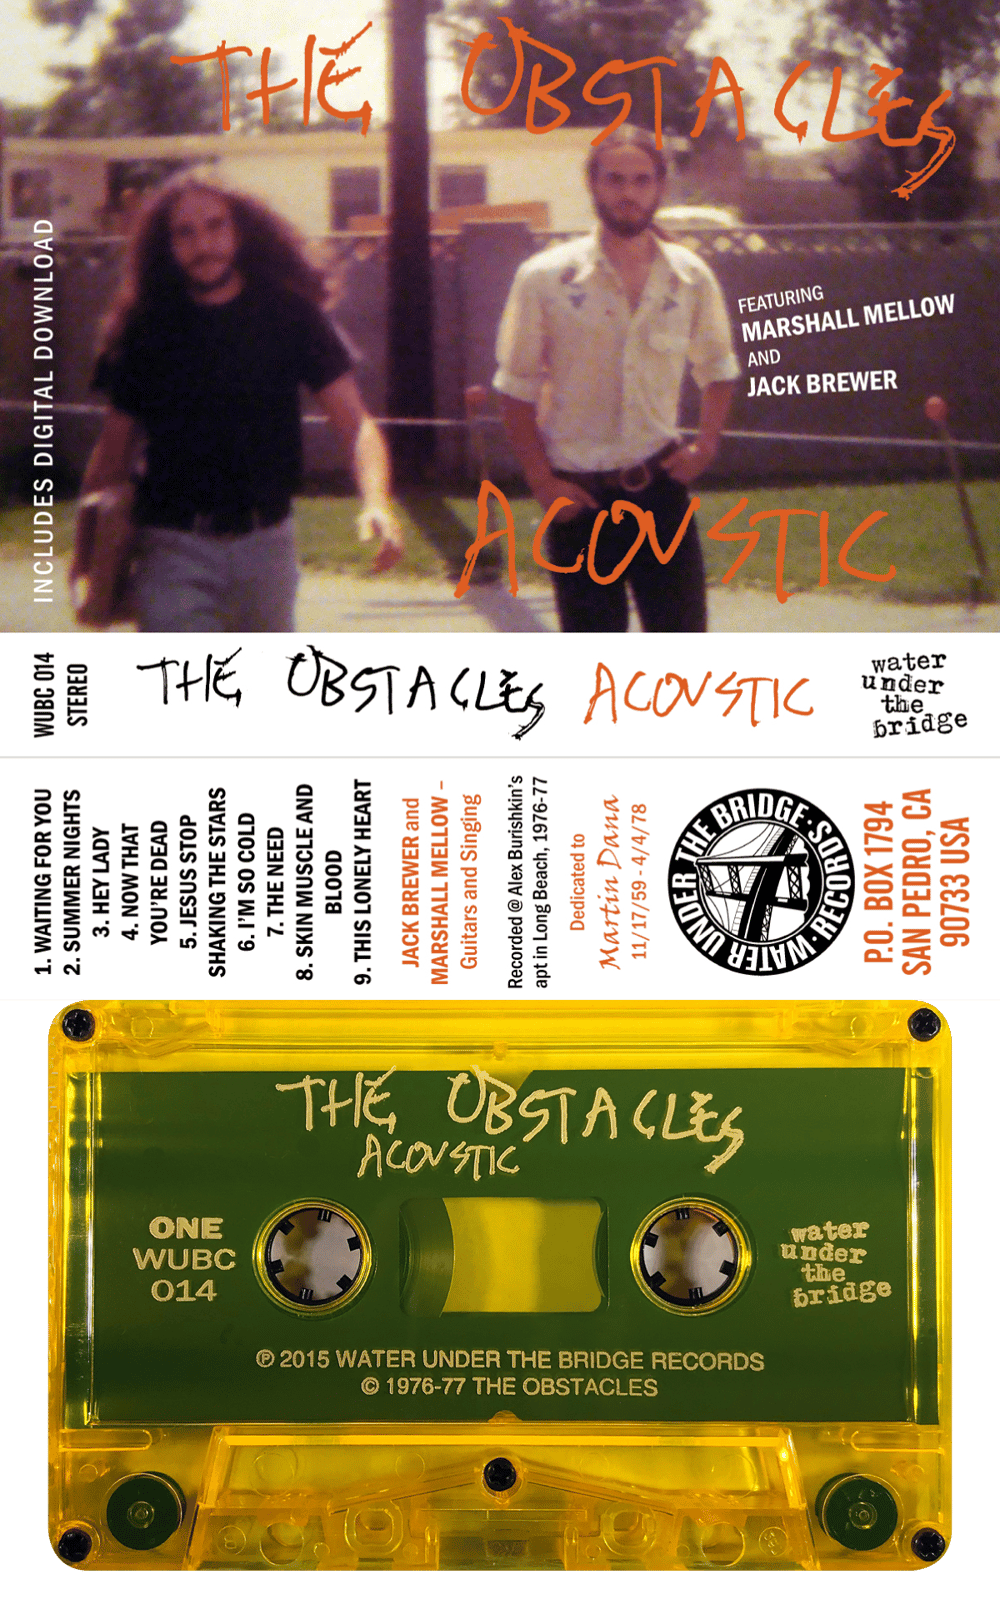 THE OBSTACLES - Acoustic 1976 → cass (precursor to Saccharine Trust)